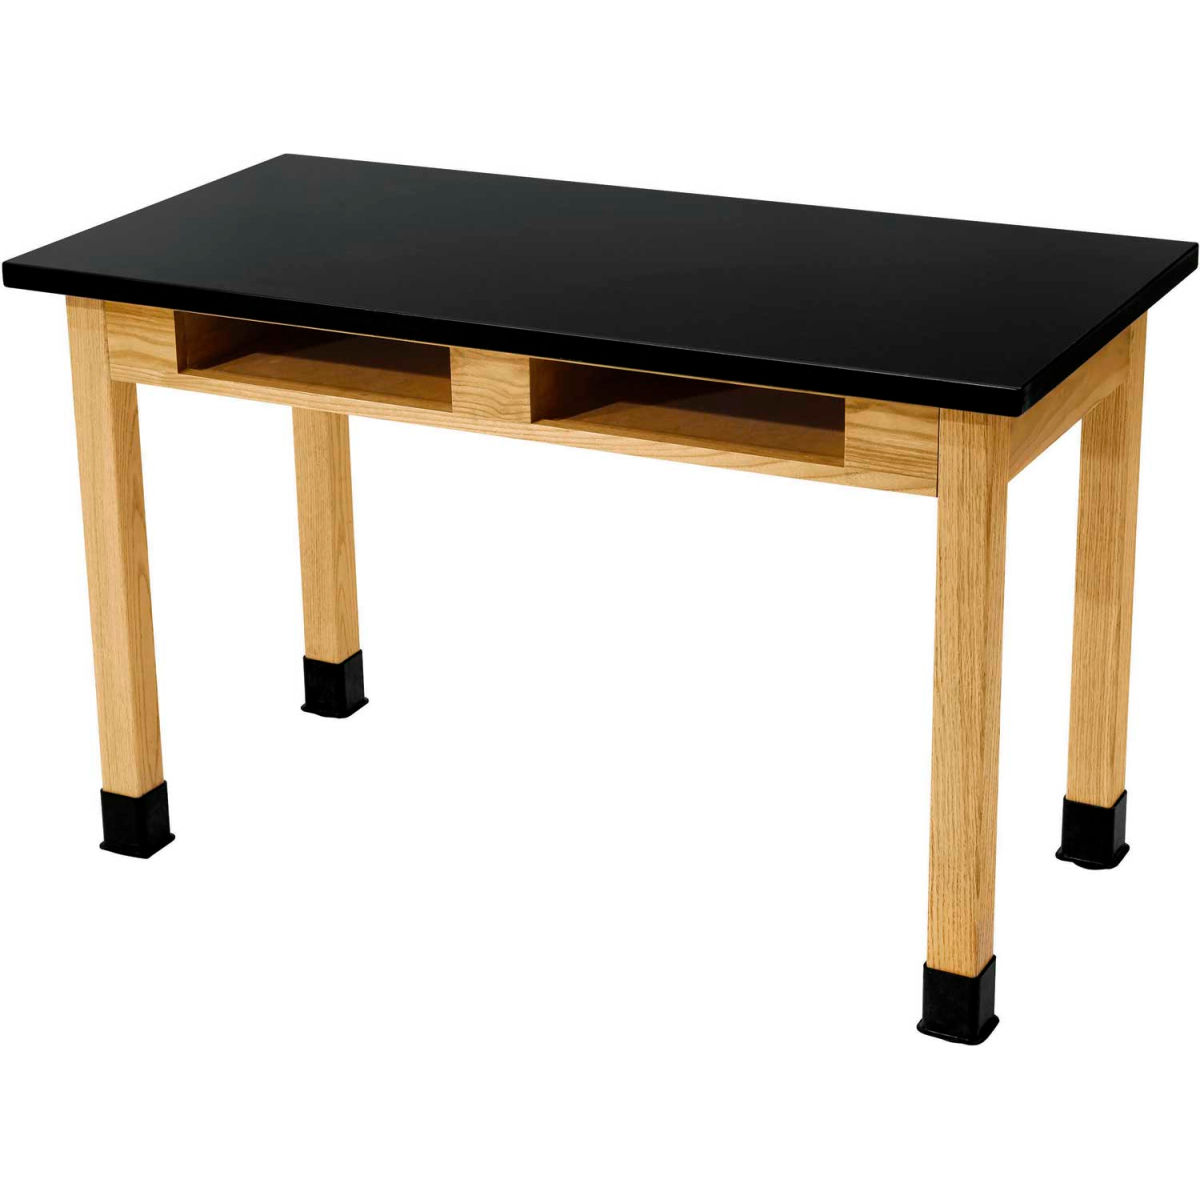 B1109962 Science Lab Table with Compartment & Chemical Resistant Top - Black with Oak Leg - 48 x 24 x 36 in -  National Public Seating